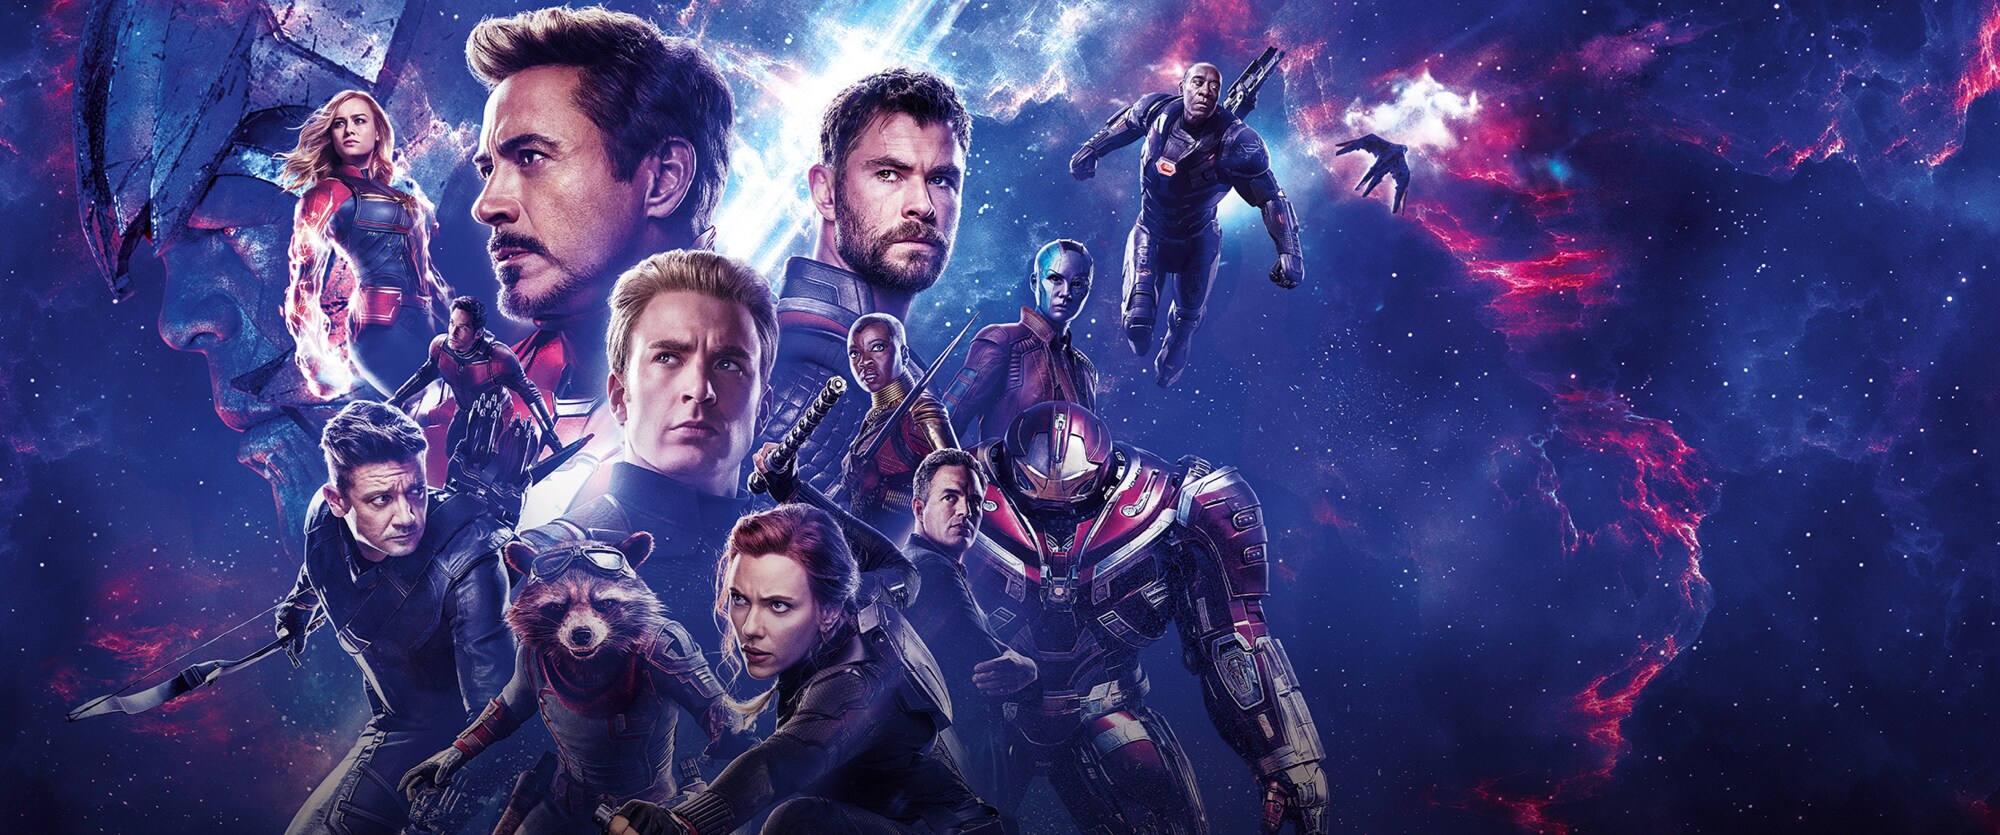 Avengers: Endgame for iphone download